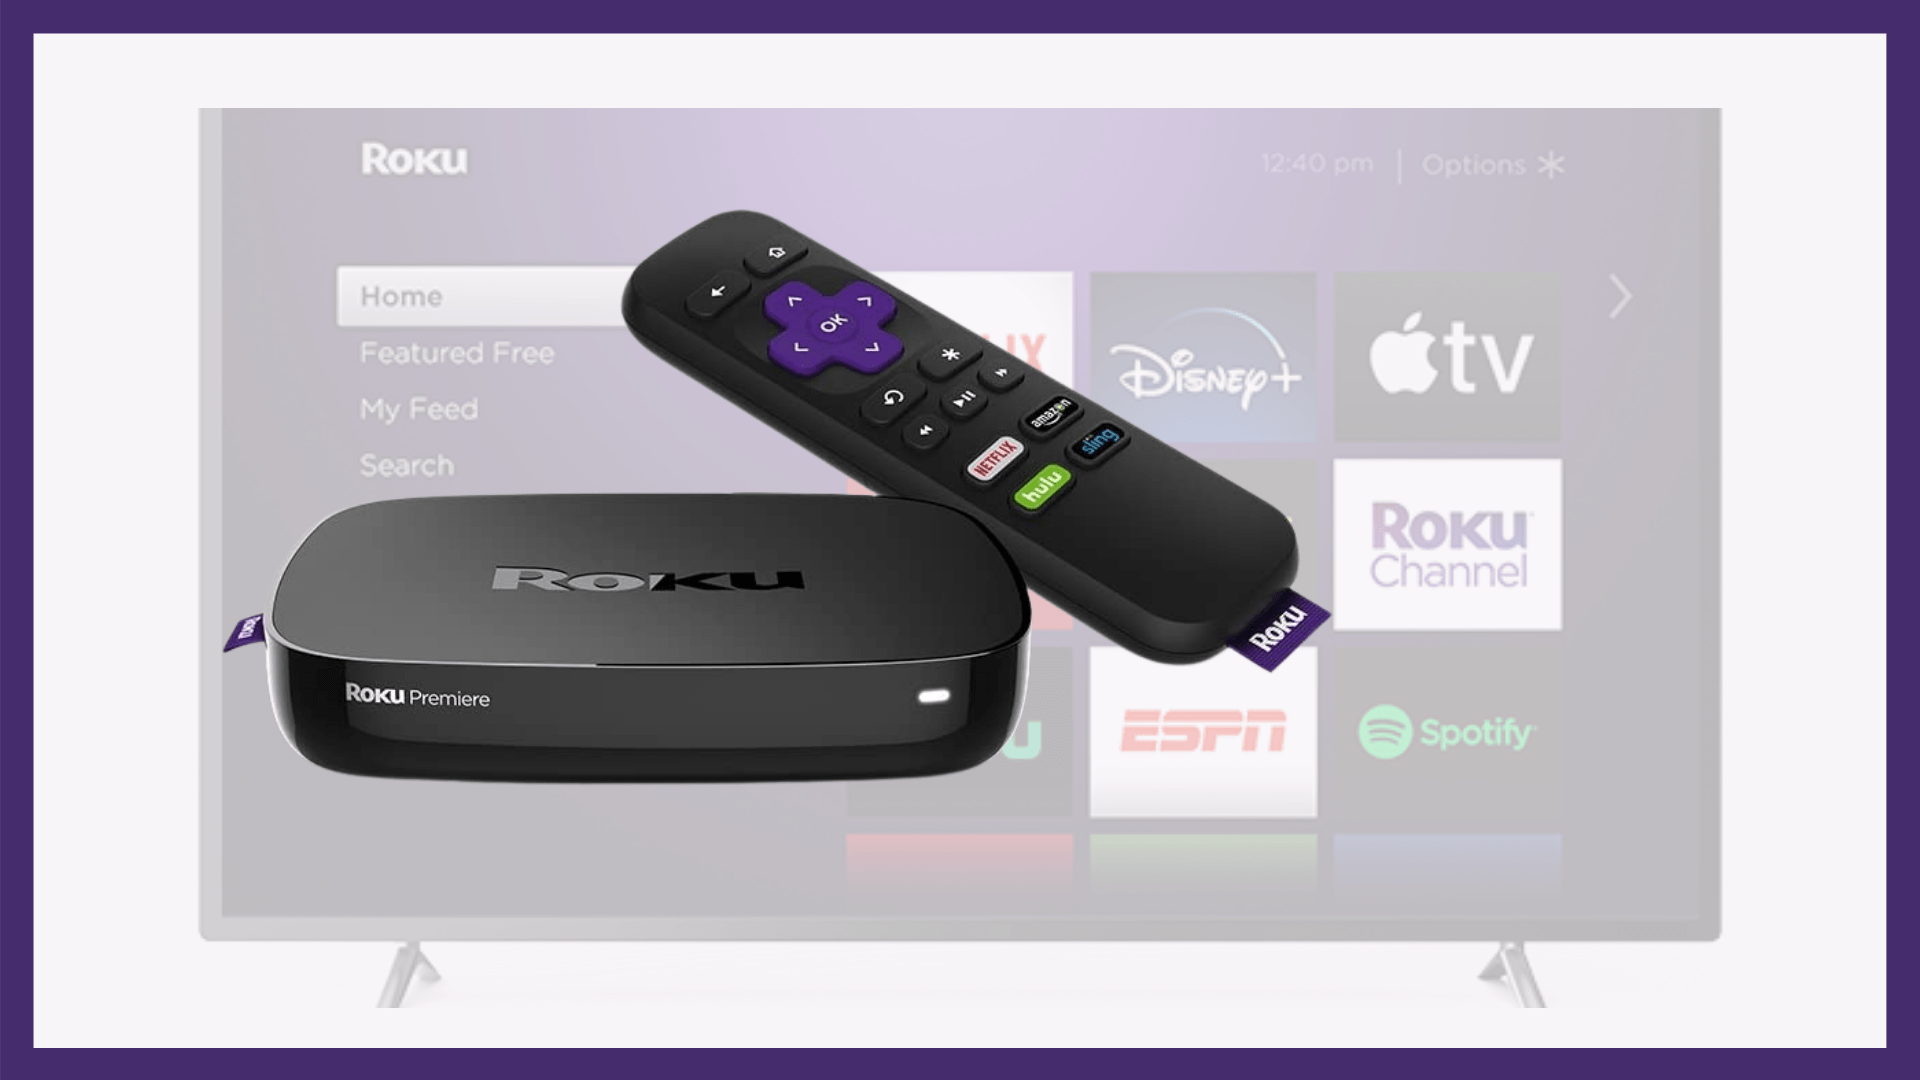 Click/tap image for Roku check out details.